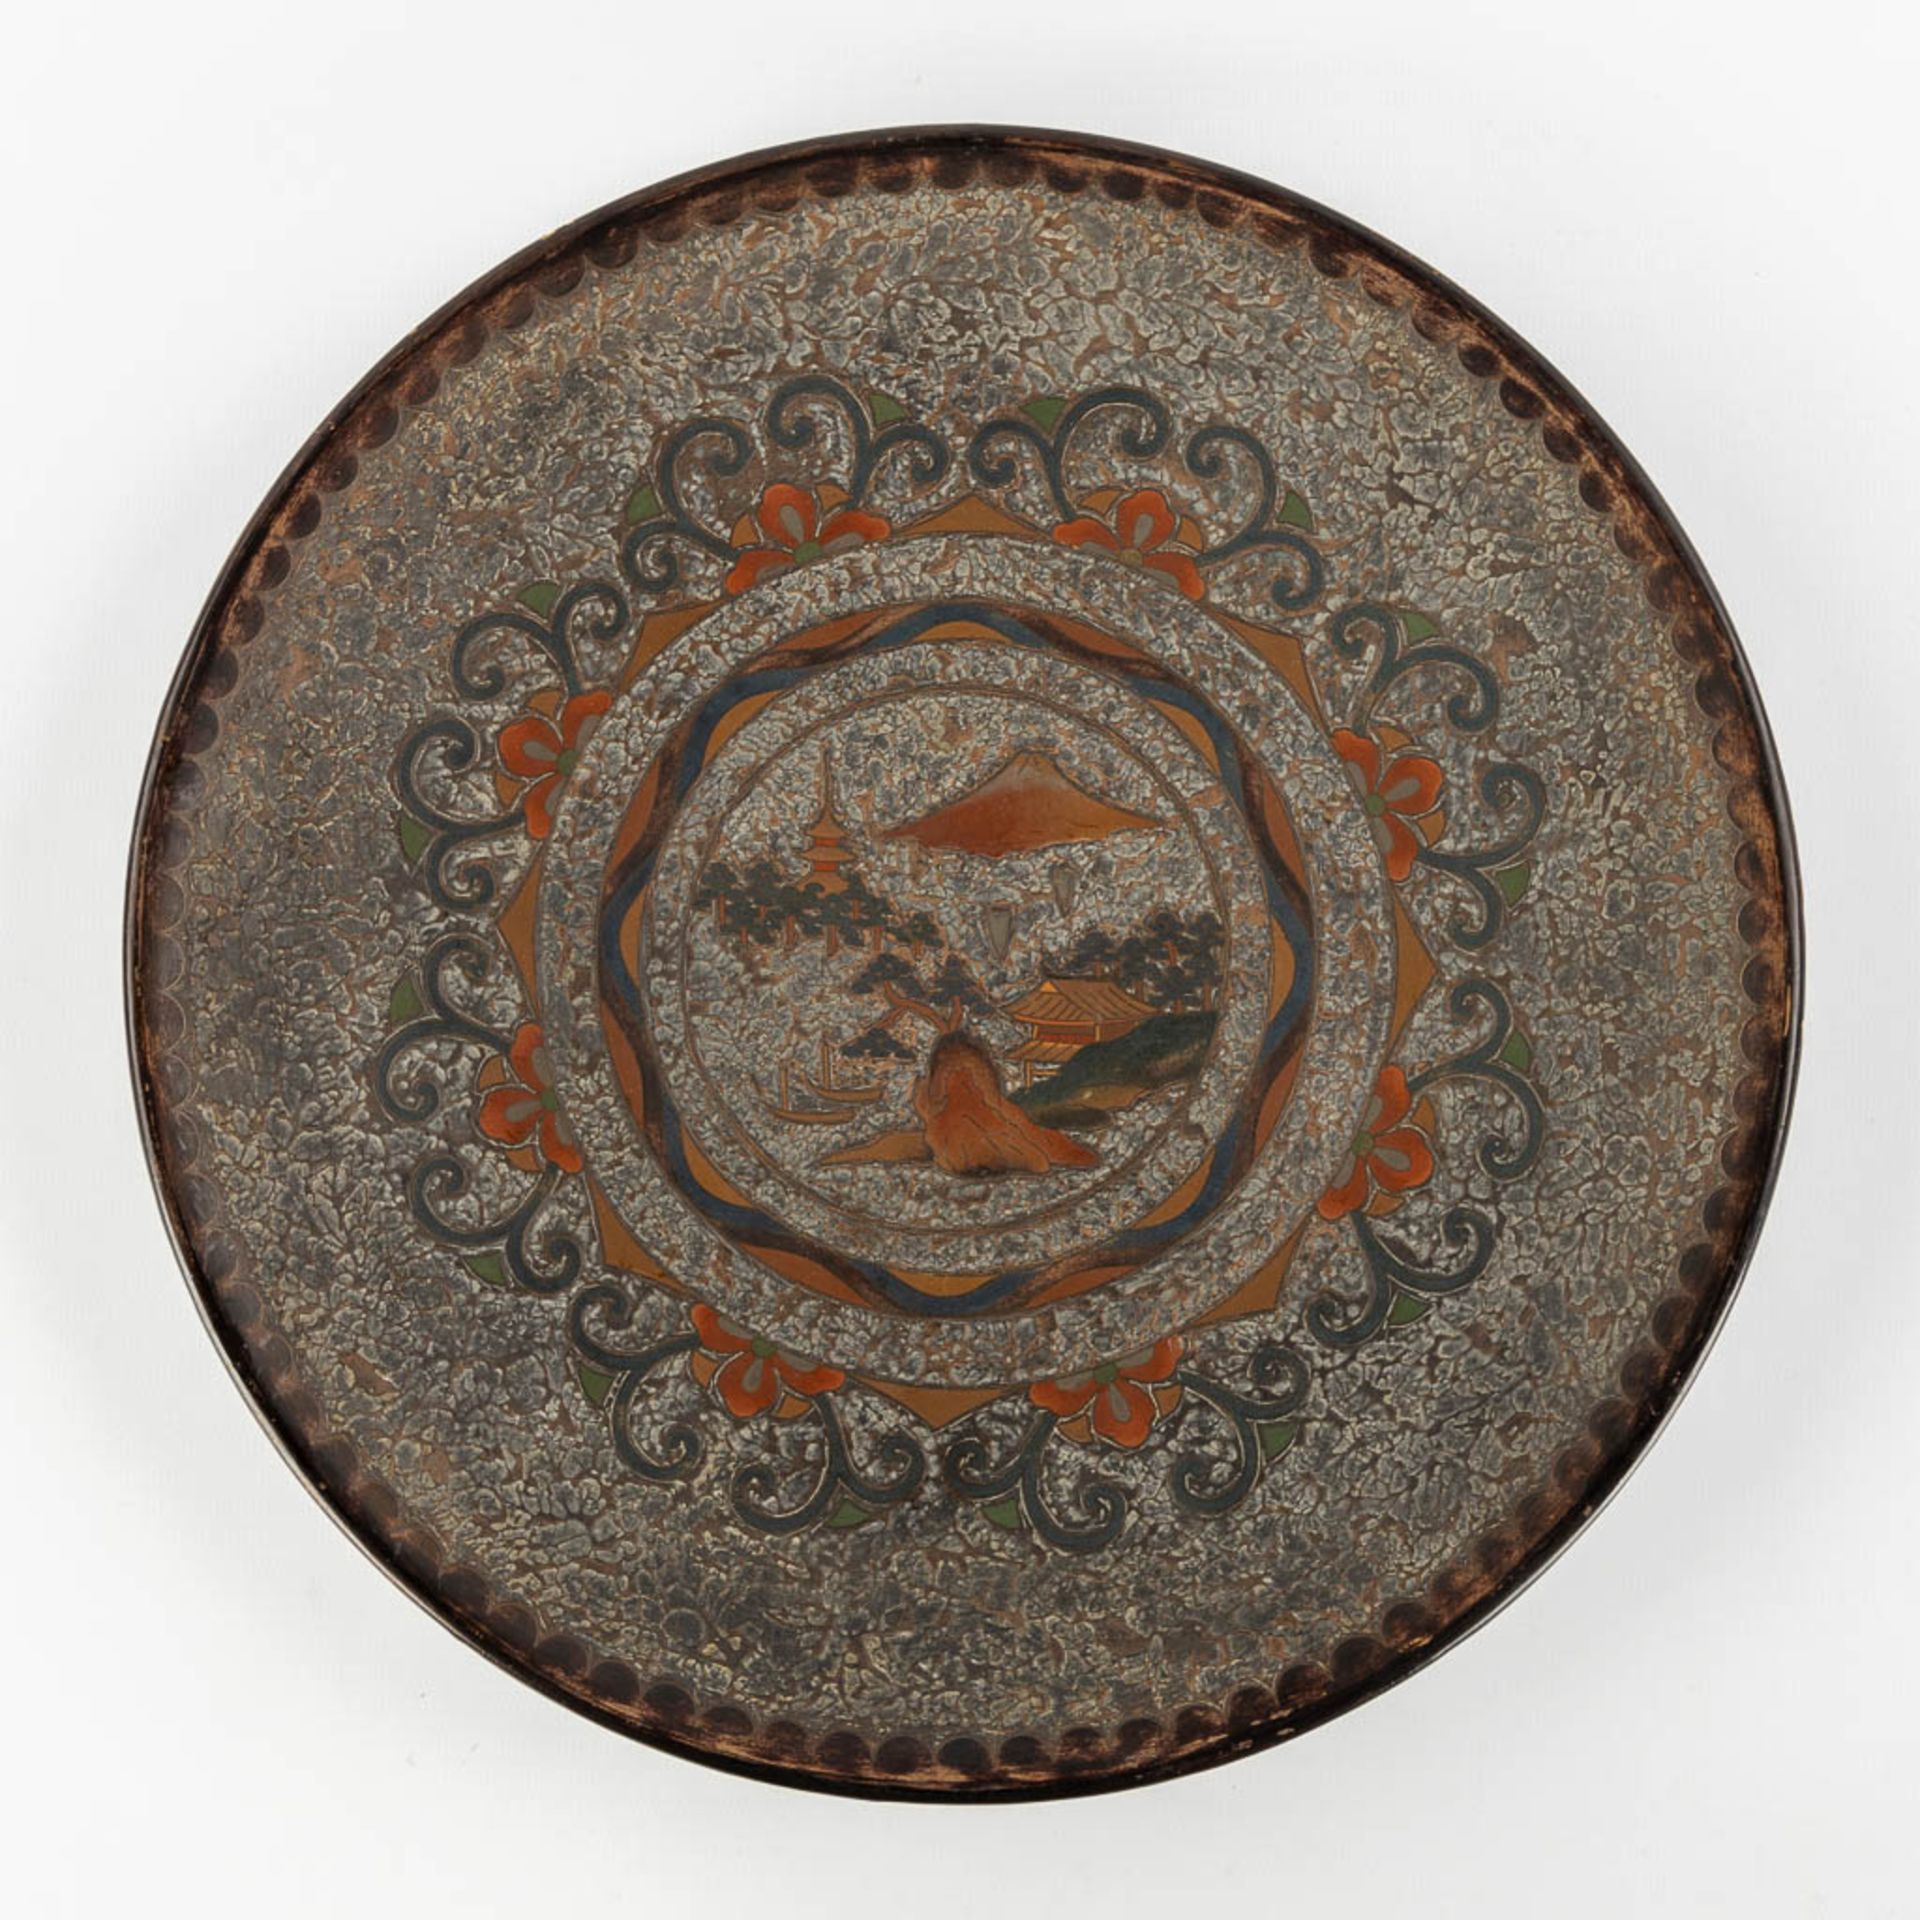 A Japanese vase and plate, stoneware inlaid with copper. Circa 1920. (H:22 x D:31 cm) - Image 15 of 19